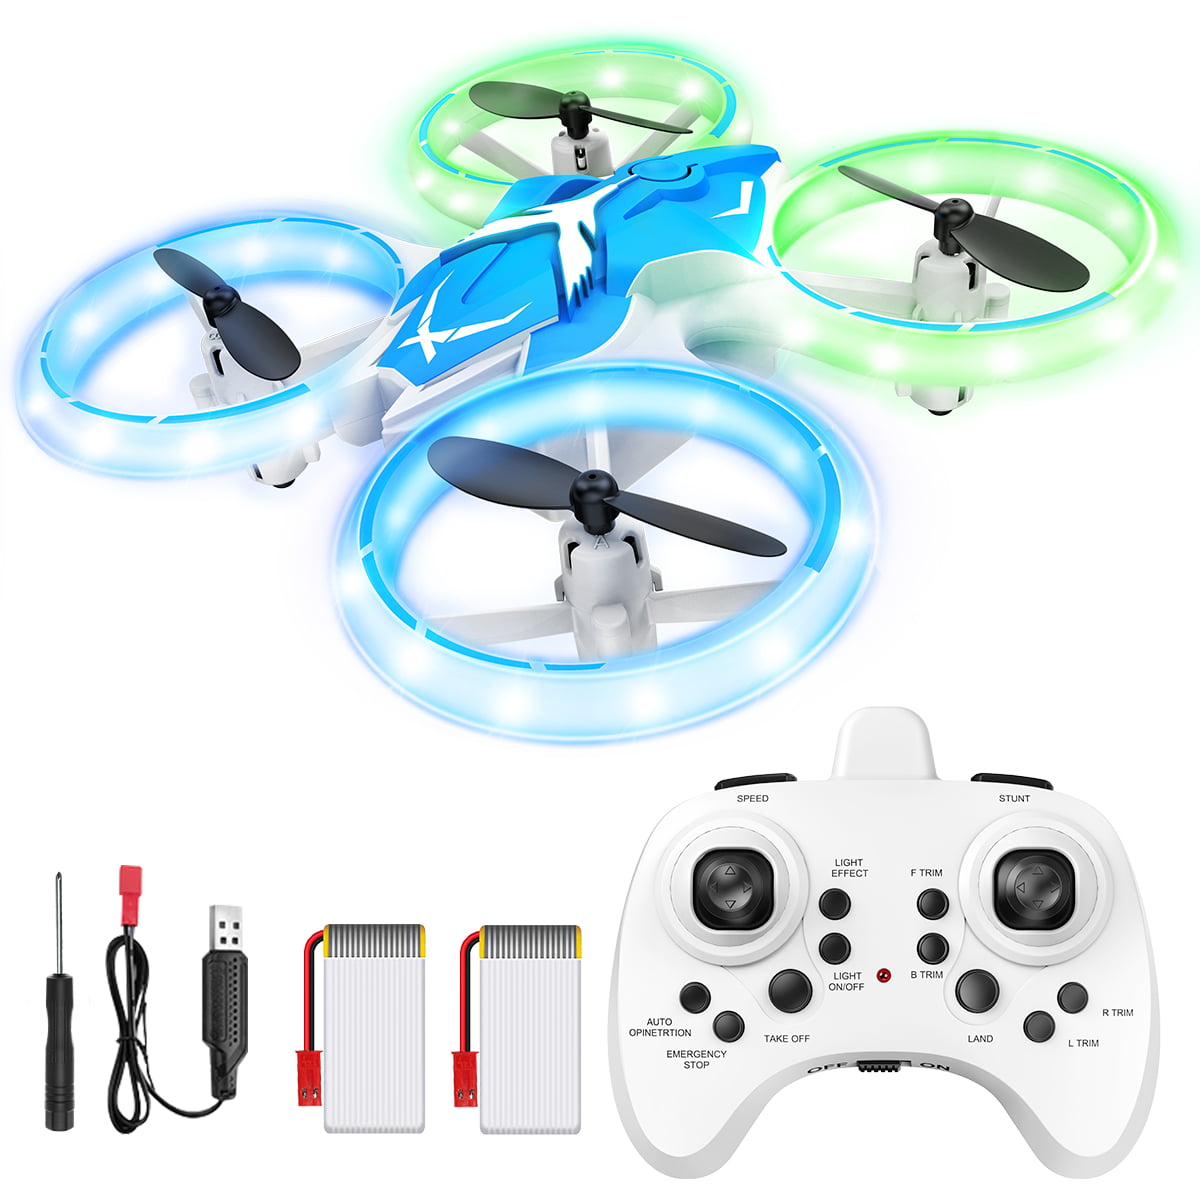 LED Mini Drone for Kids and Beginners